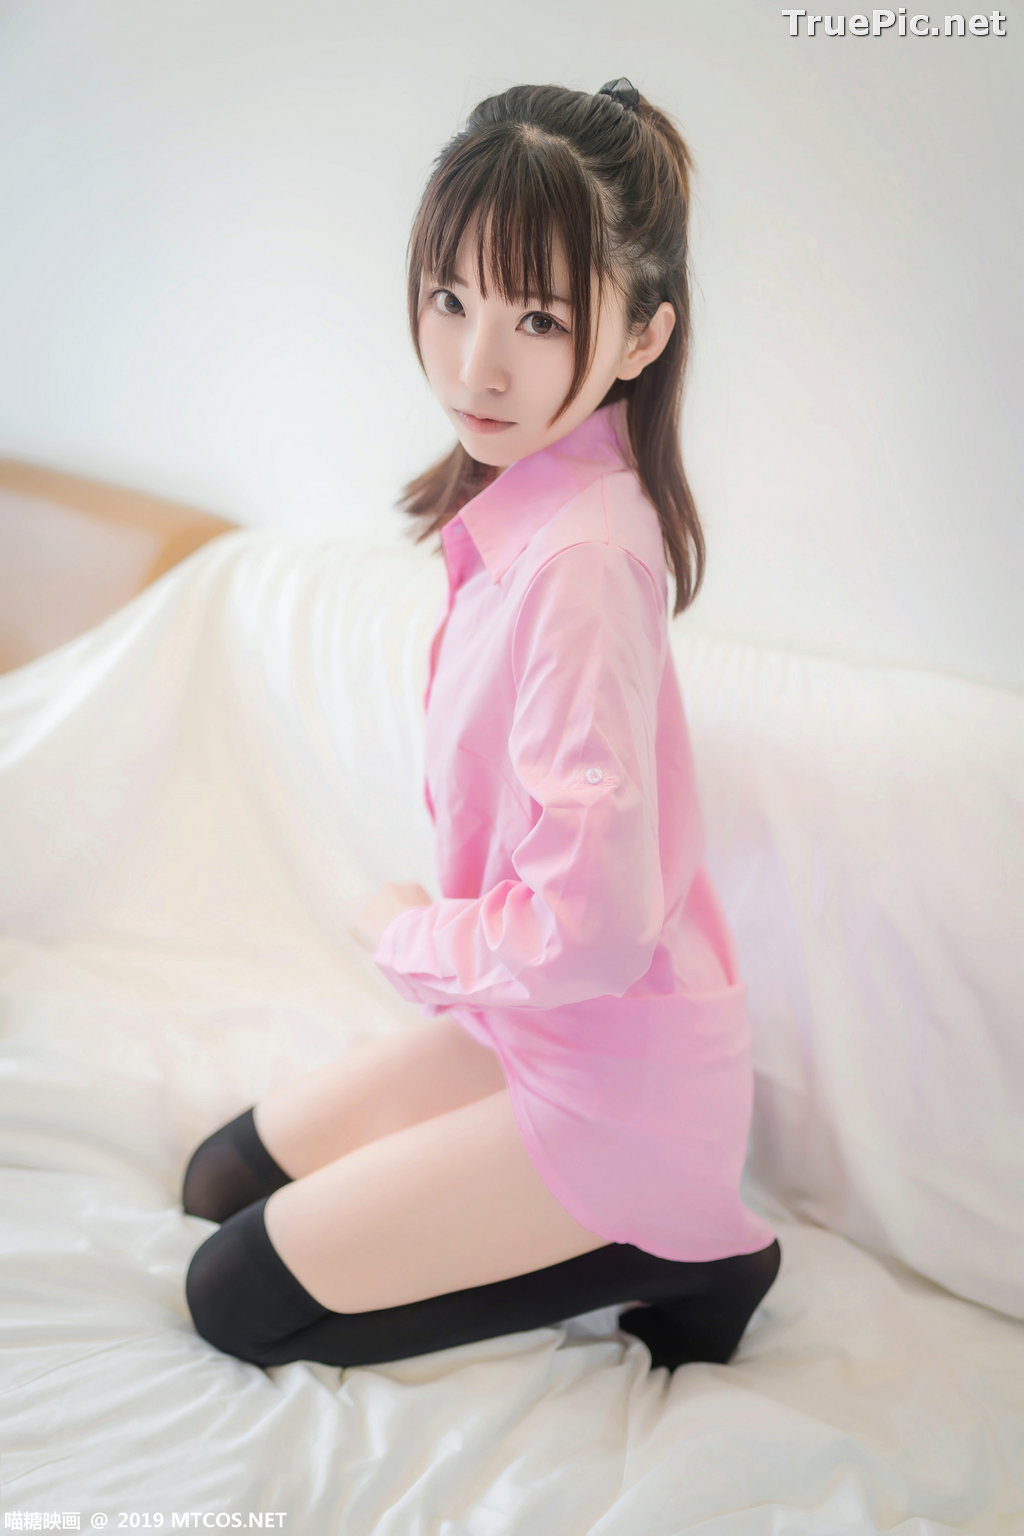 Image [MTCos] 喵糖映画 Vol.022 – Chinese Model – Pink Shirt and Black Stockings - TruePic.net - Picture-33